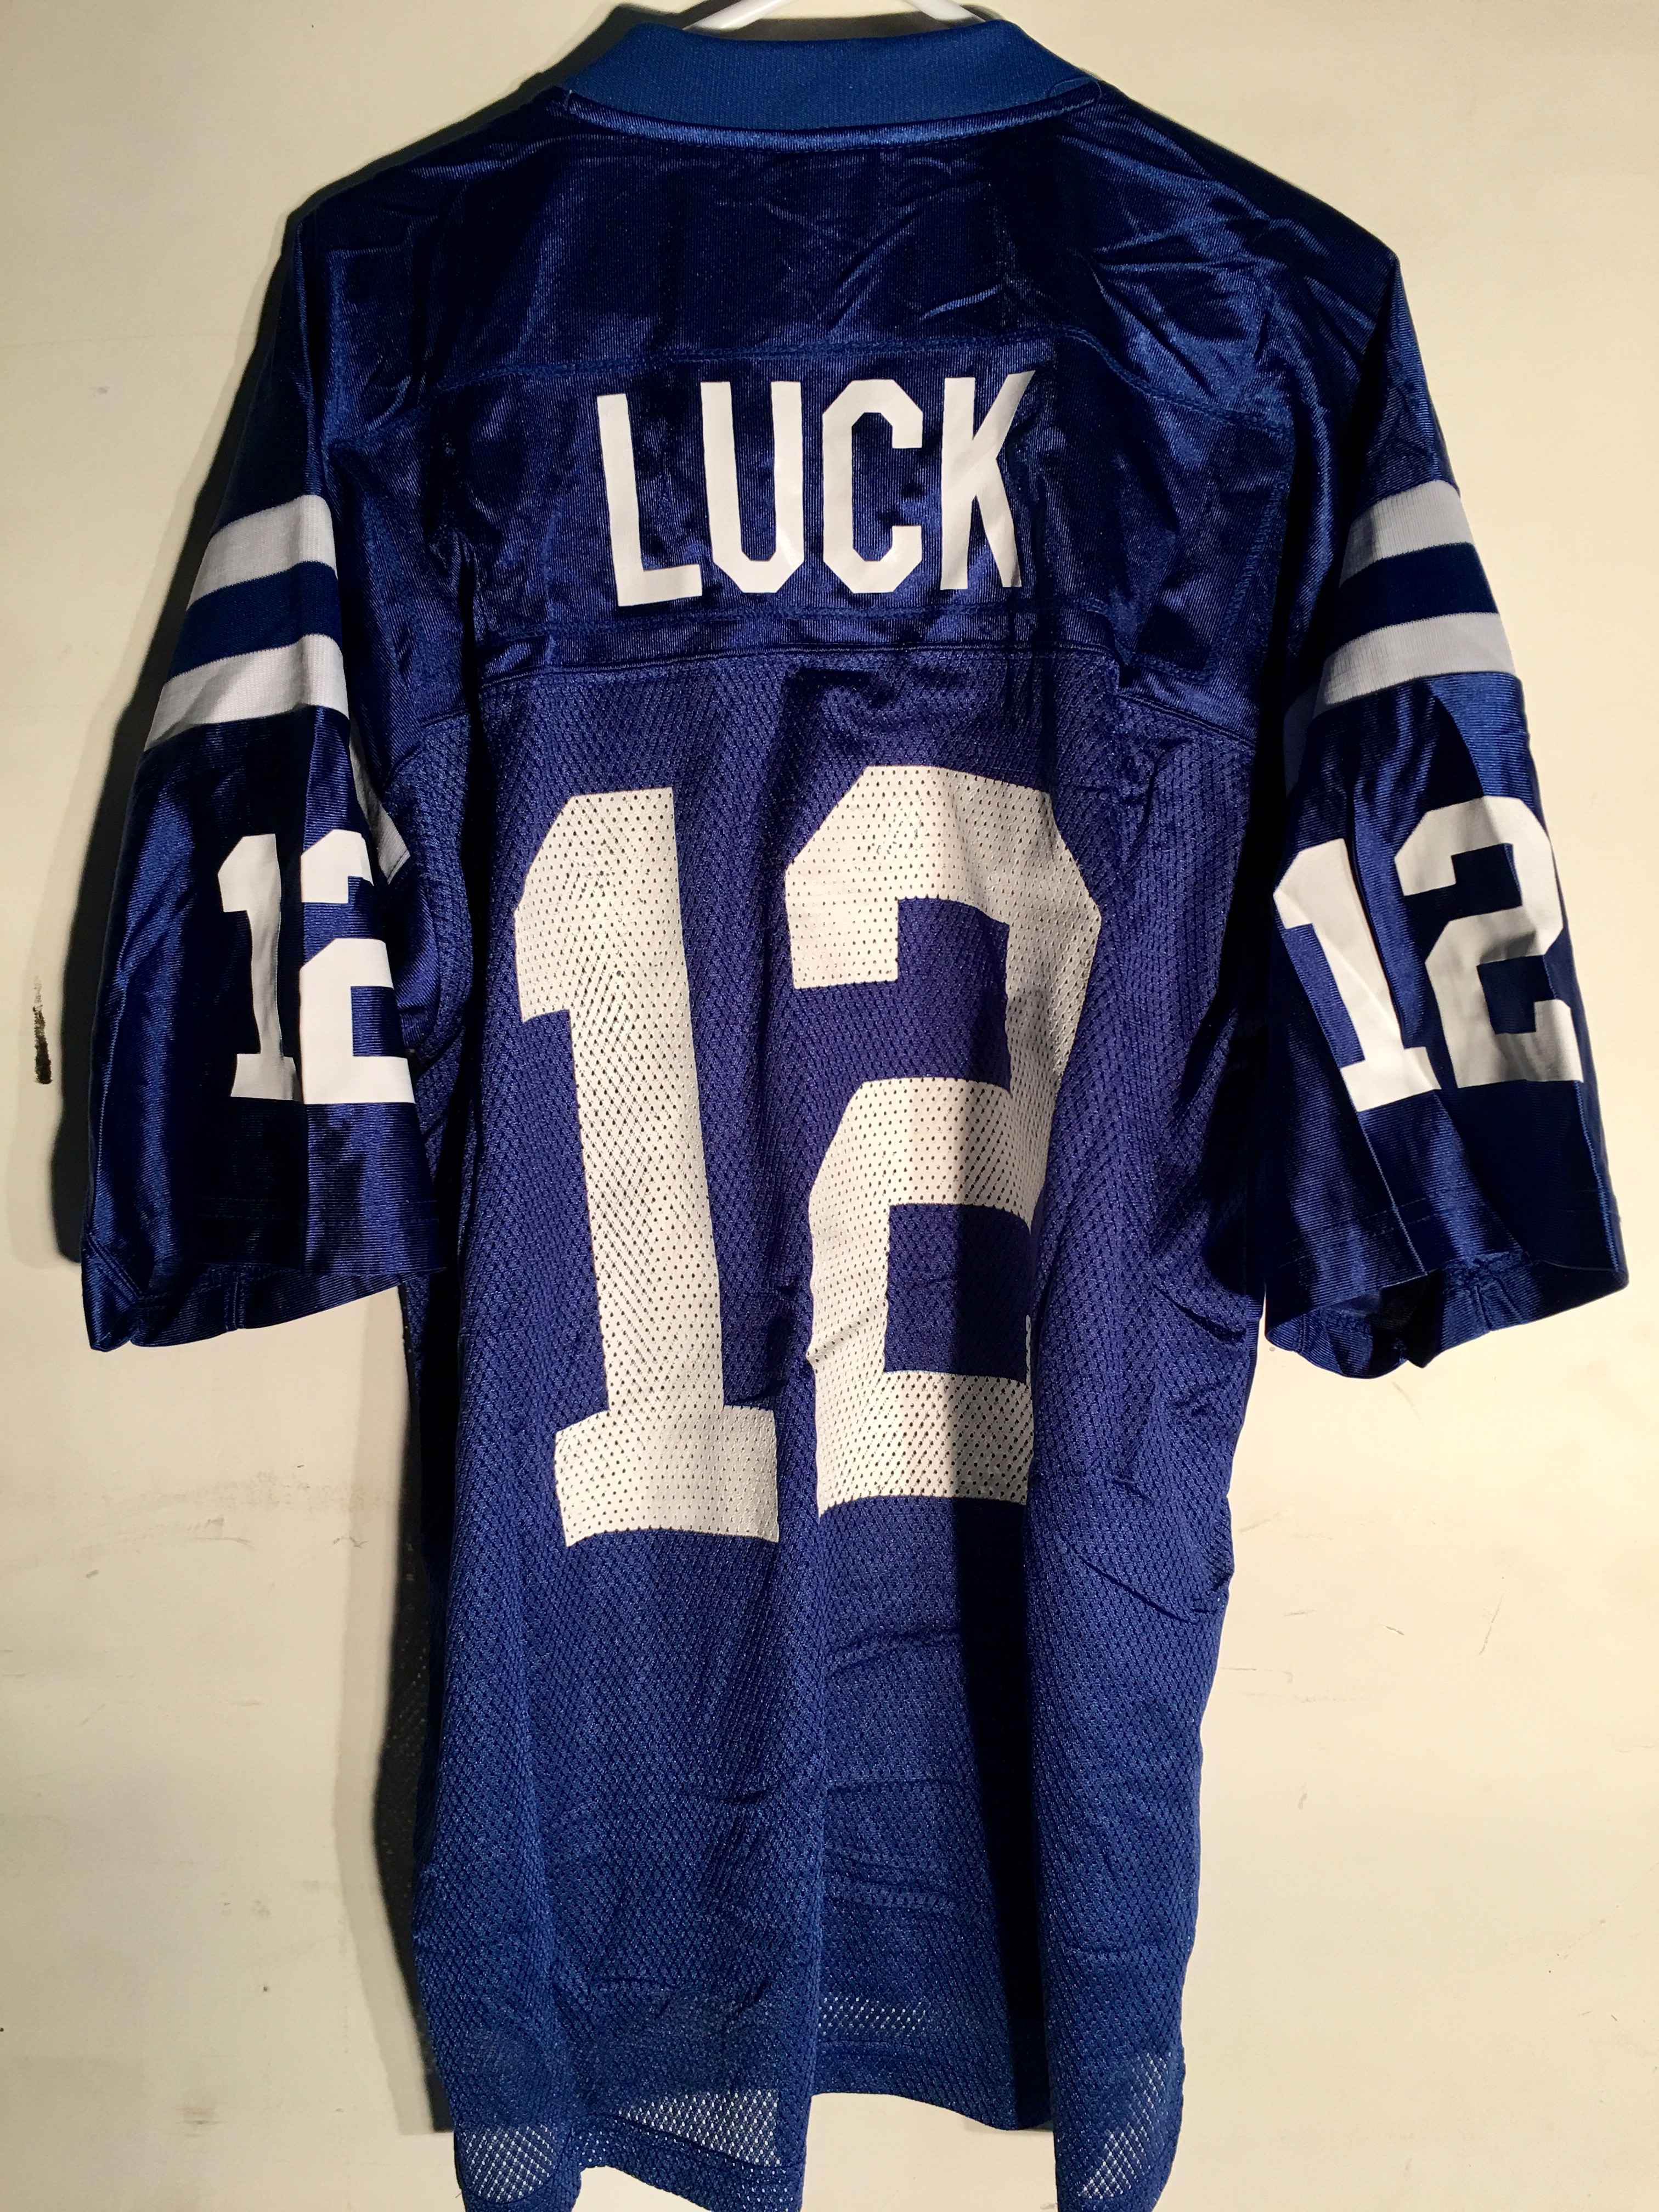 Reebok NFL Jersey Indianapolis Colts Andrew Luck Blue sz 2X | eBay